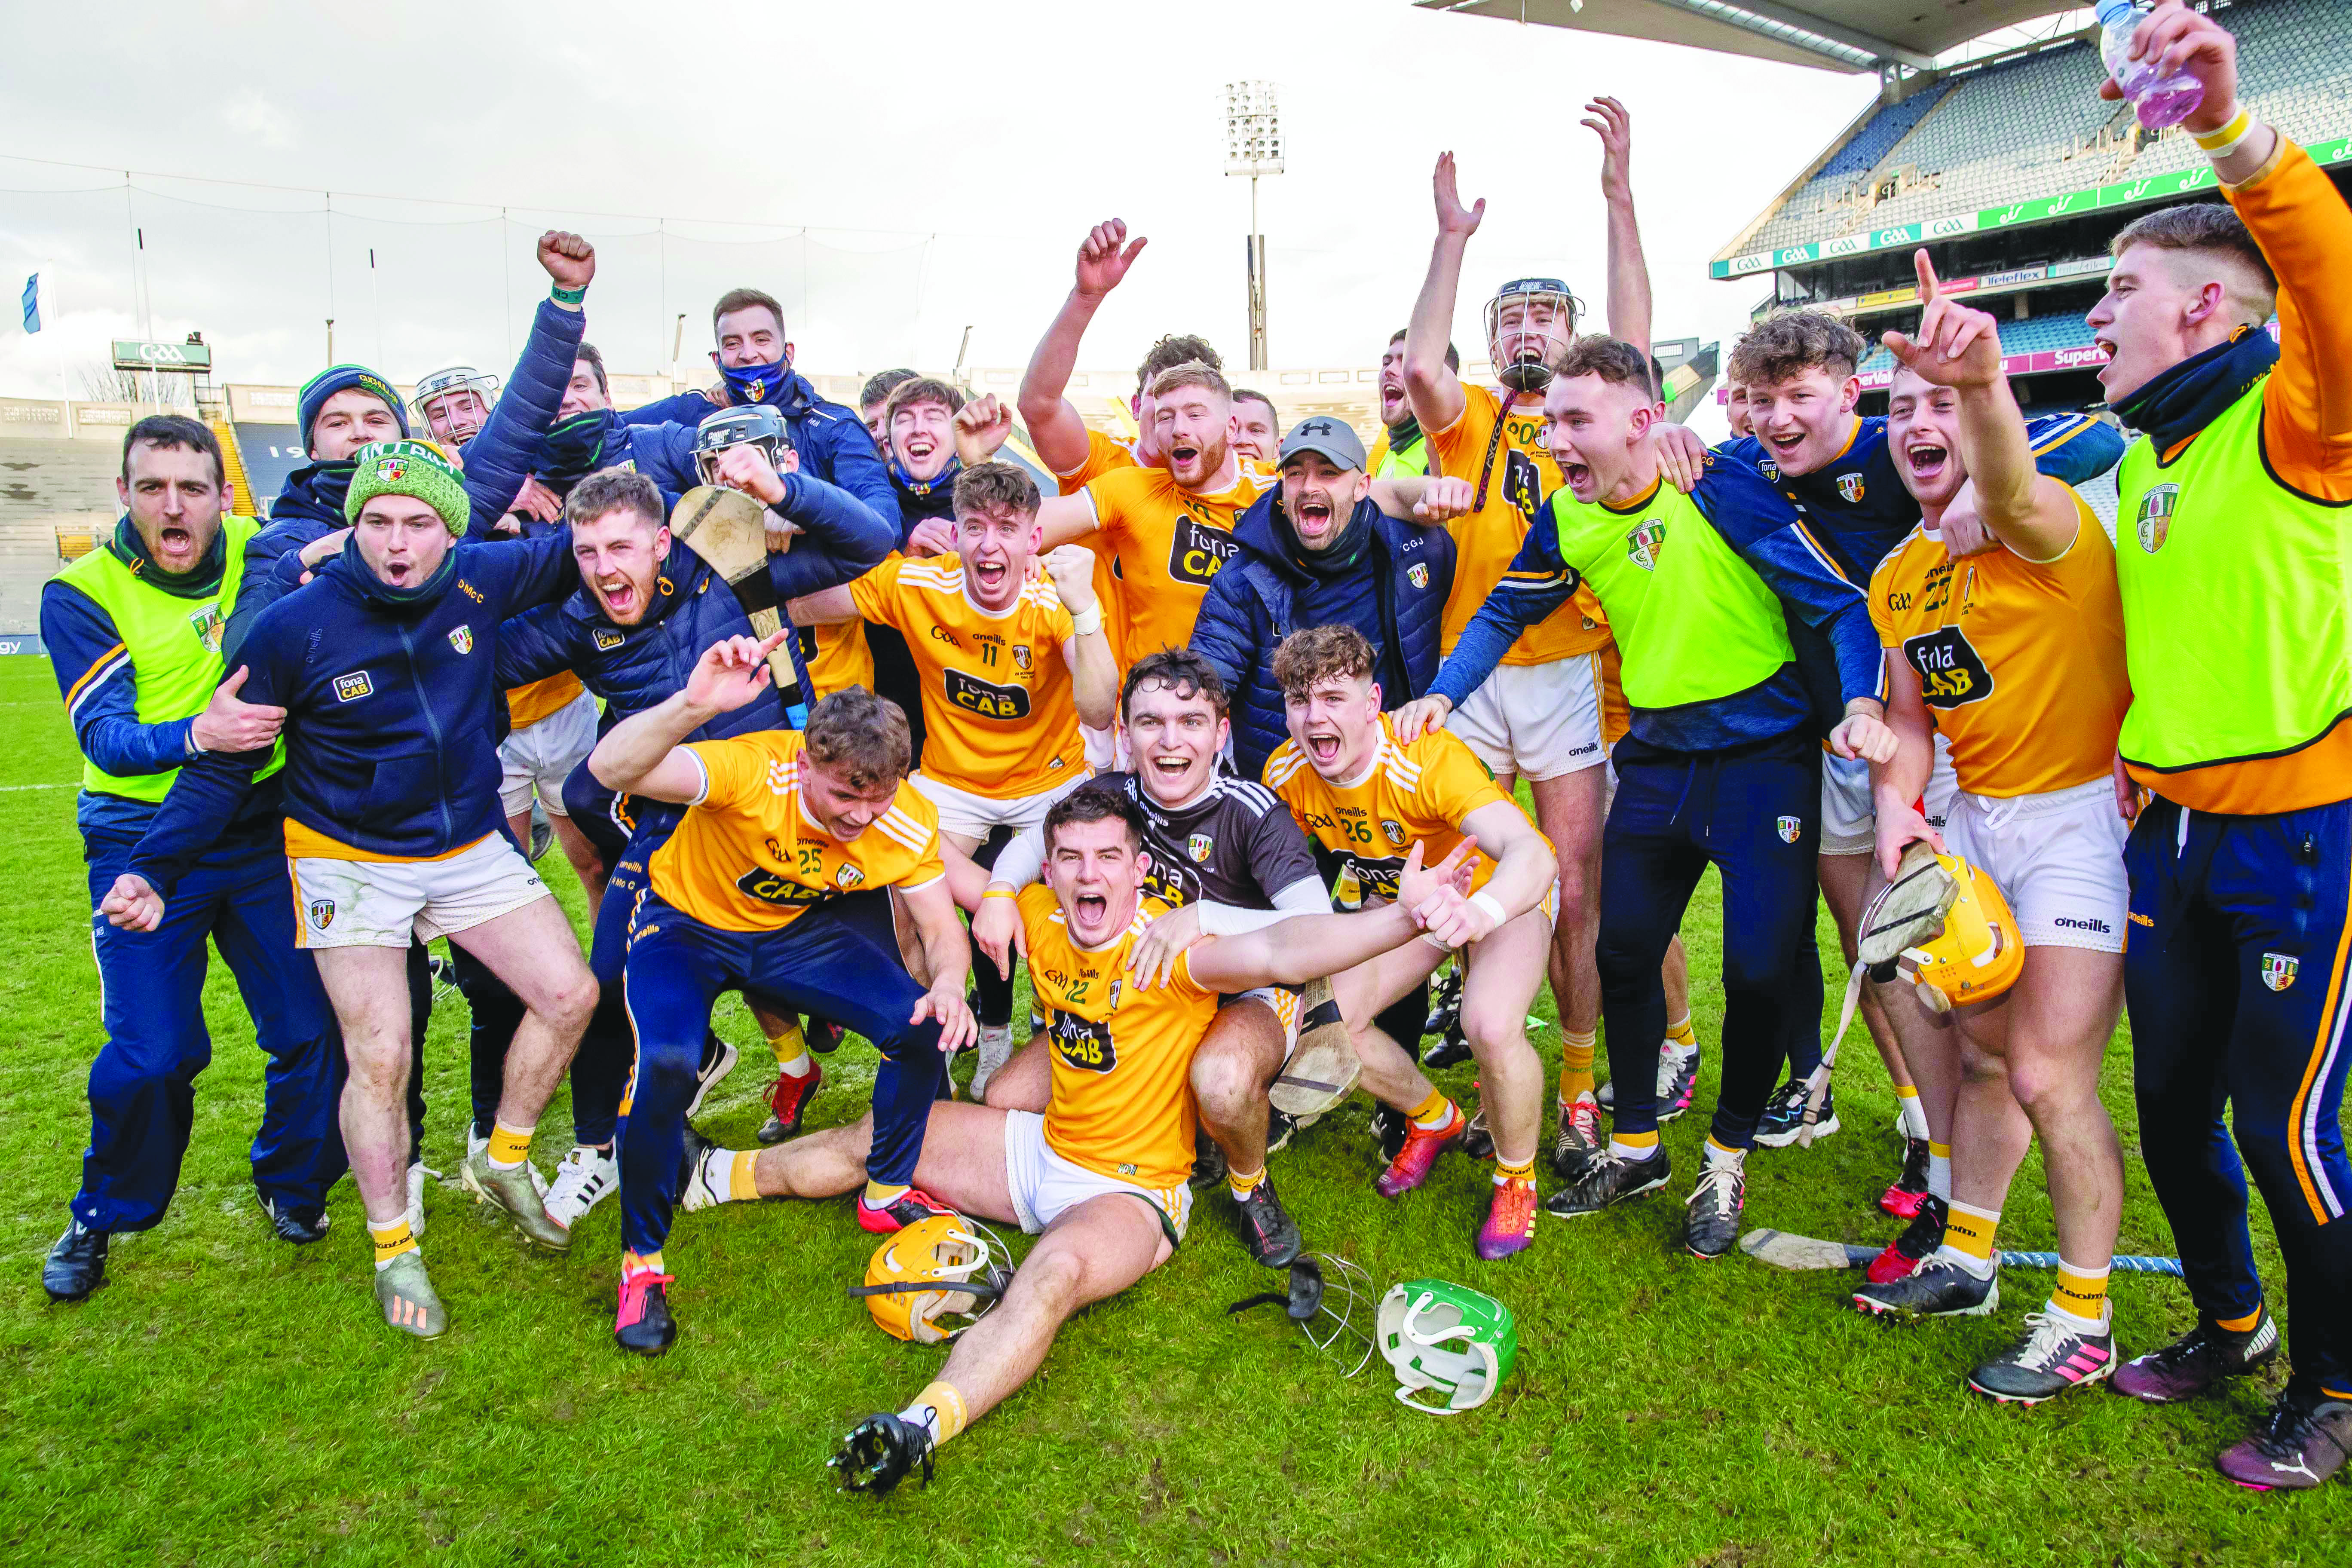 Antrim’s hurlers enjoyed a successful 2020 with Division 2A and Joe McDonagh Cup honours, but the challenges will be greater in the top tier this year